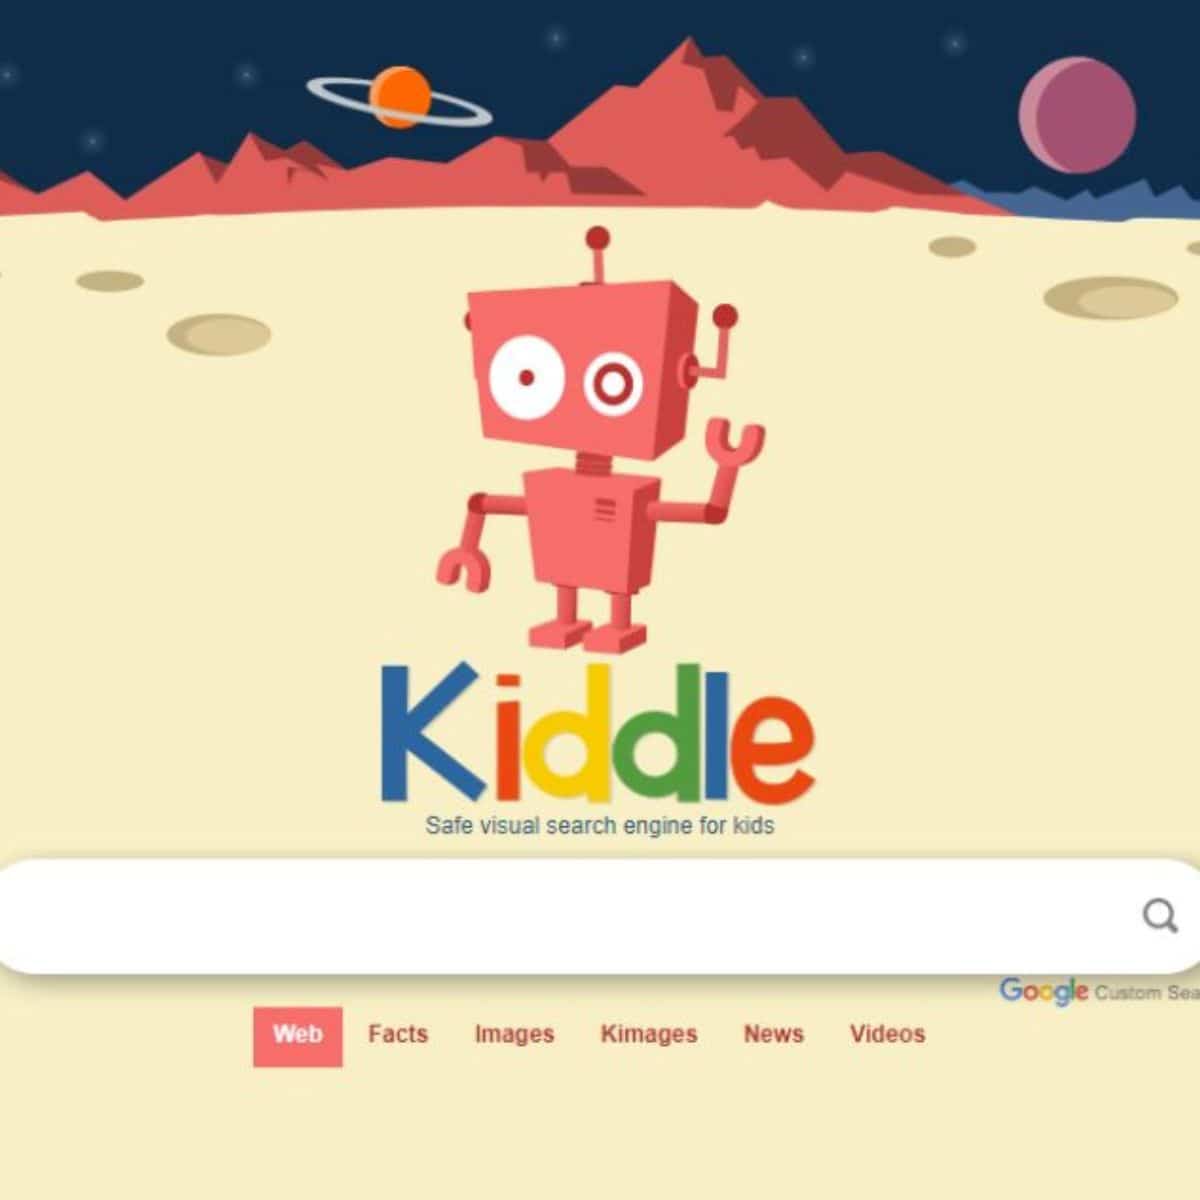 Kiddle search engine front page.